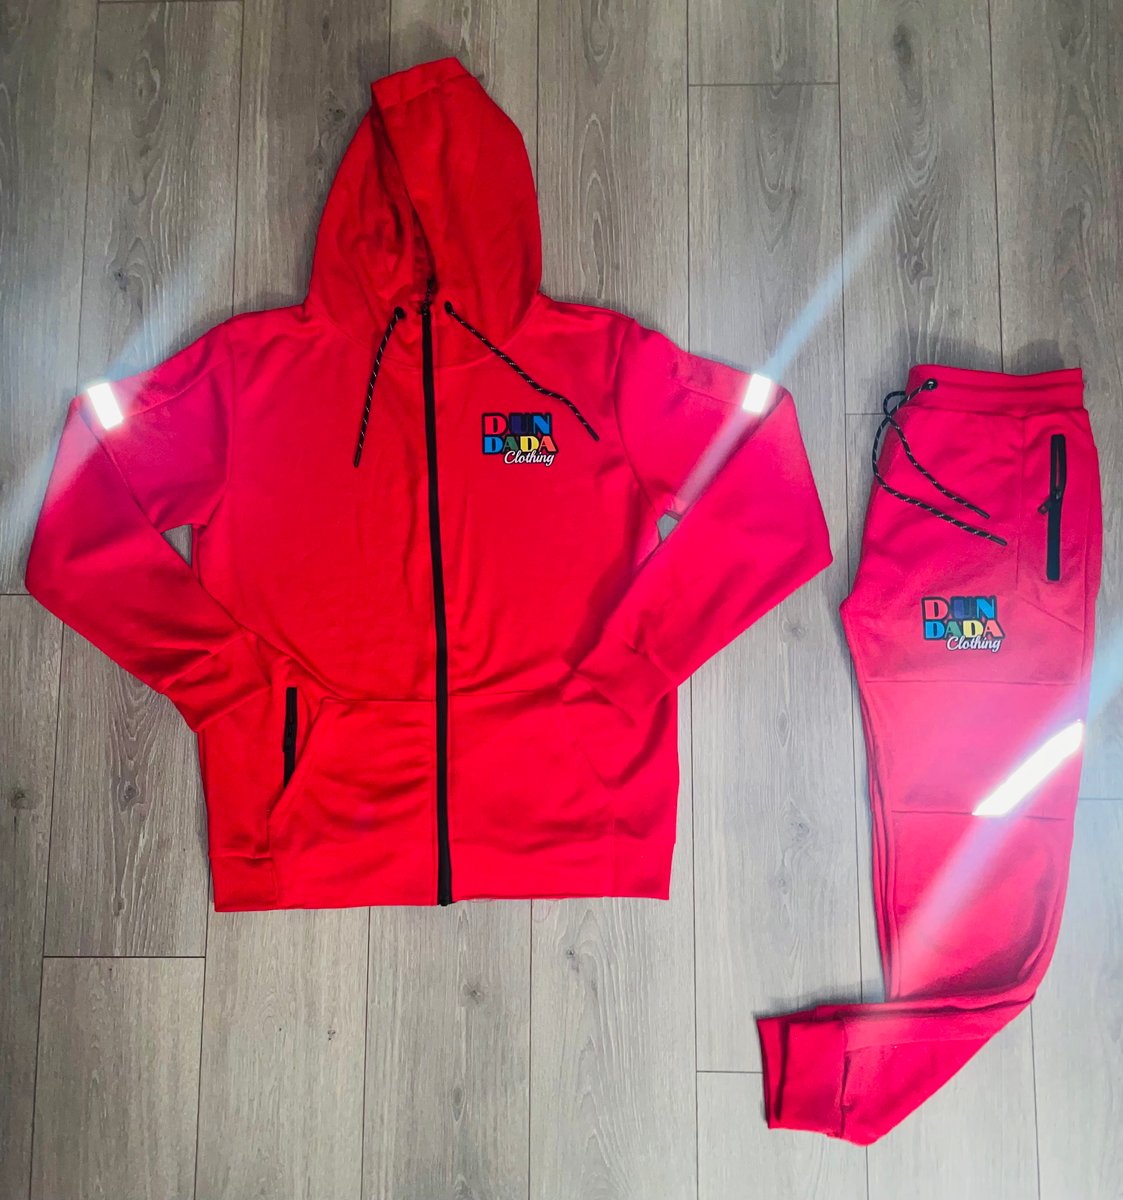 https://assets.bigcartel.com/product_images/abcba3d0-2a79-473a-b5e3-32048b2c9320/men-s-red-reflective-tracksuit.jpg?auto=format&fit=max&h=1200&w=1200